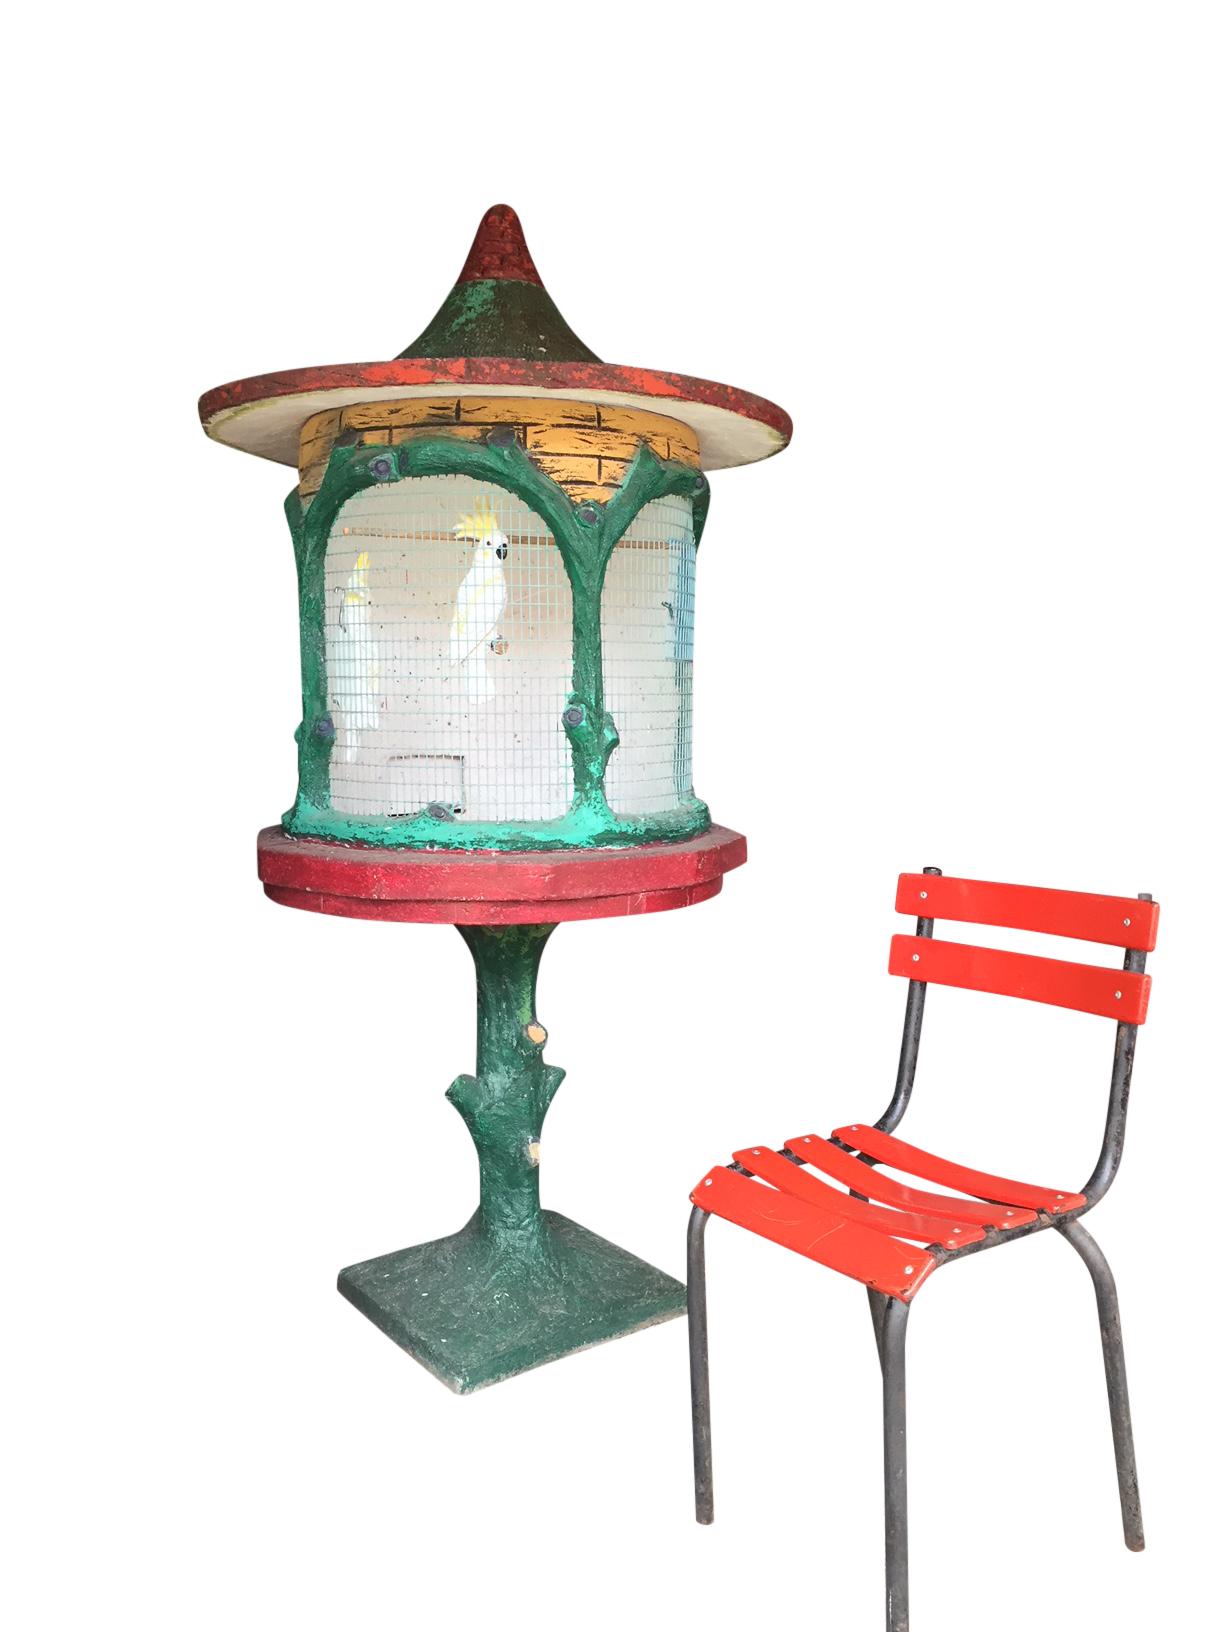 Great Garden Ornament , this Outside Birdcage for Garden , Patio or Terrace . 
Made of concrete - composition stone with great use of colors.
Exists of 3 parts: base - cage and the roof. 

Even great to use as an Interior Accent ; 
this can be at